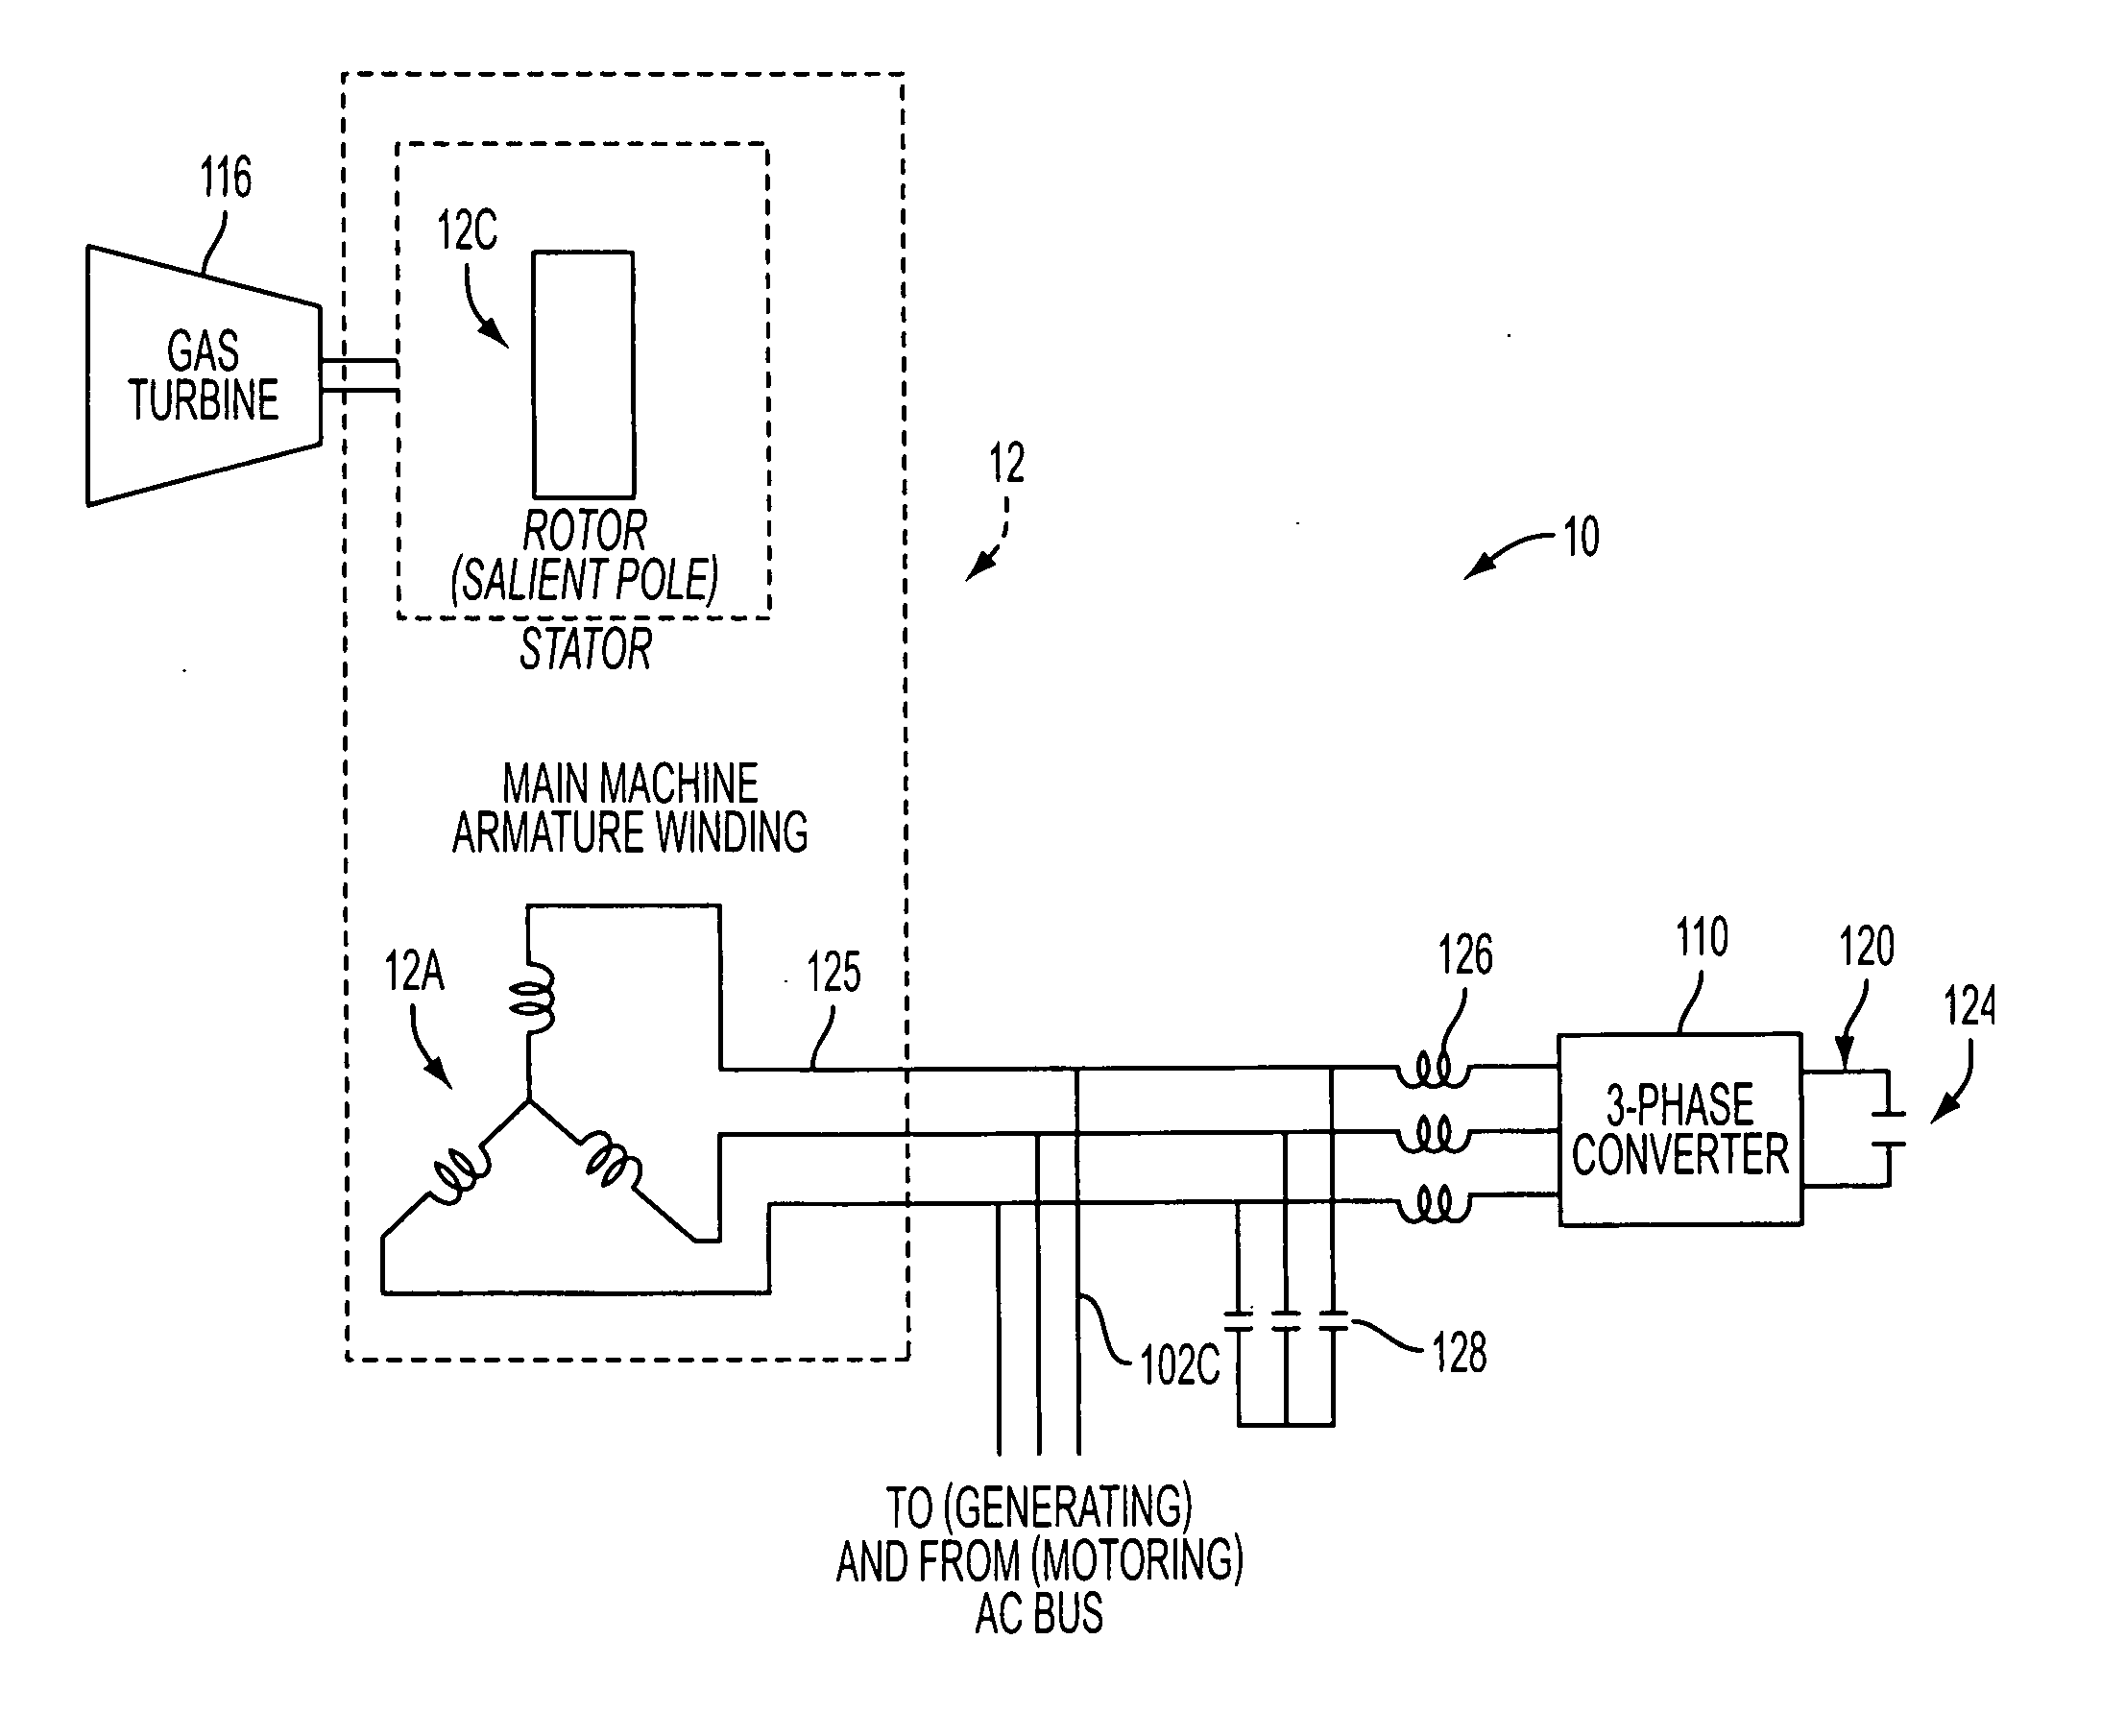 System and method for AC power generation from a reluctance machine